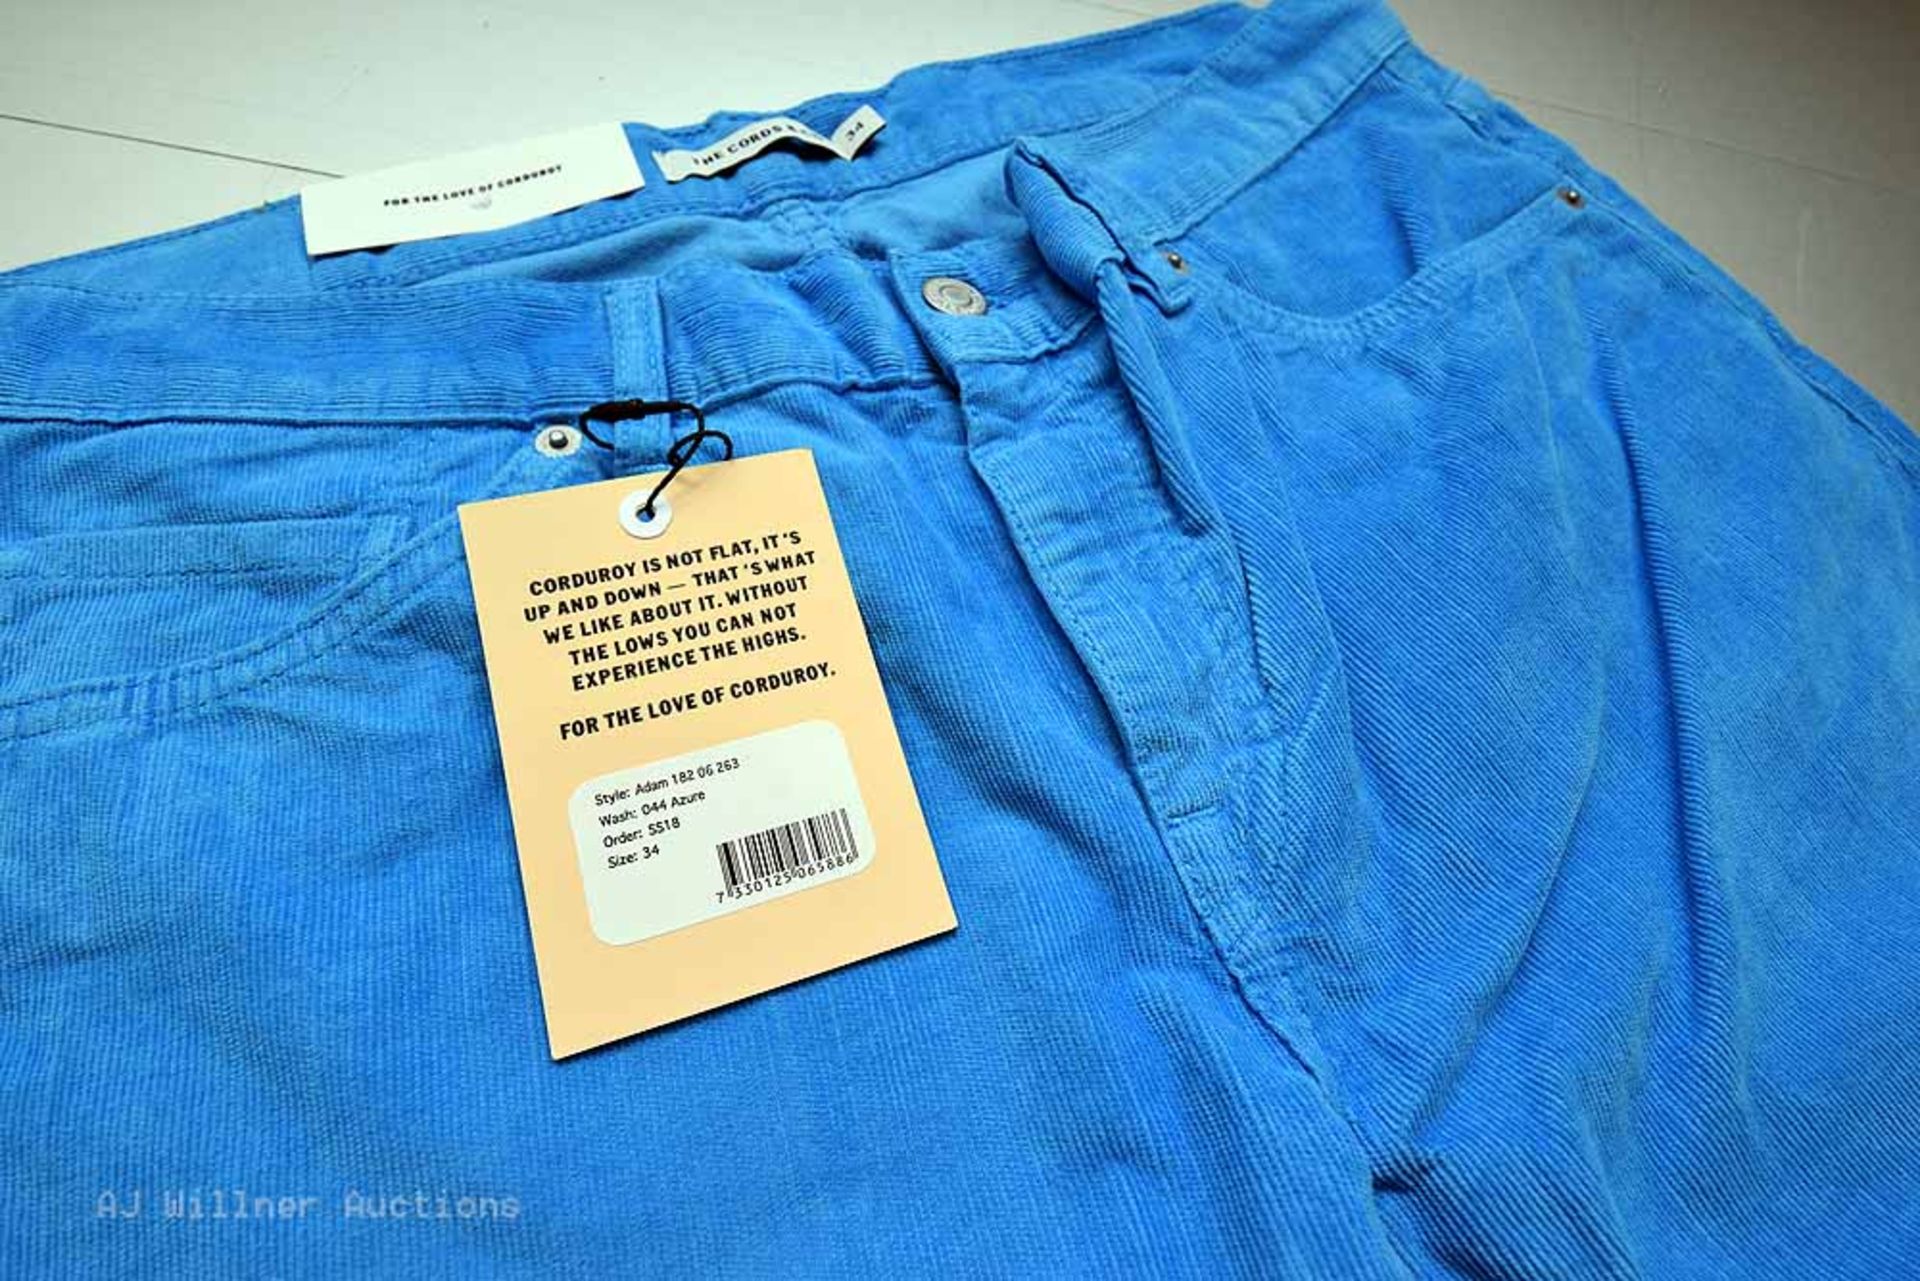 The Cords & Co. "Adam" Style, Men's 5-Pocket Mid-Waist/Classic Fit Shorts,Azure/Silver/Turq/Indigo - Image 7 of 10